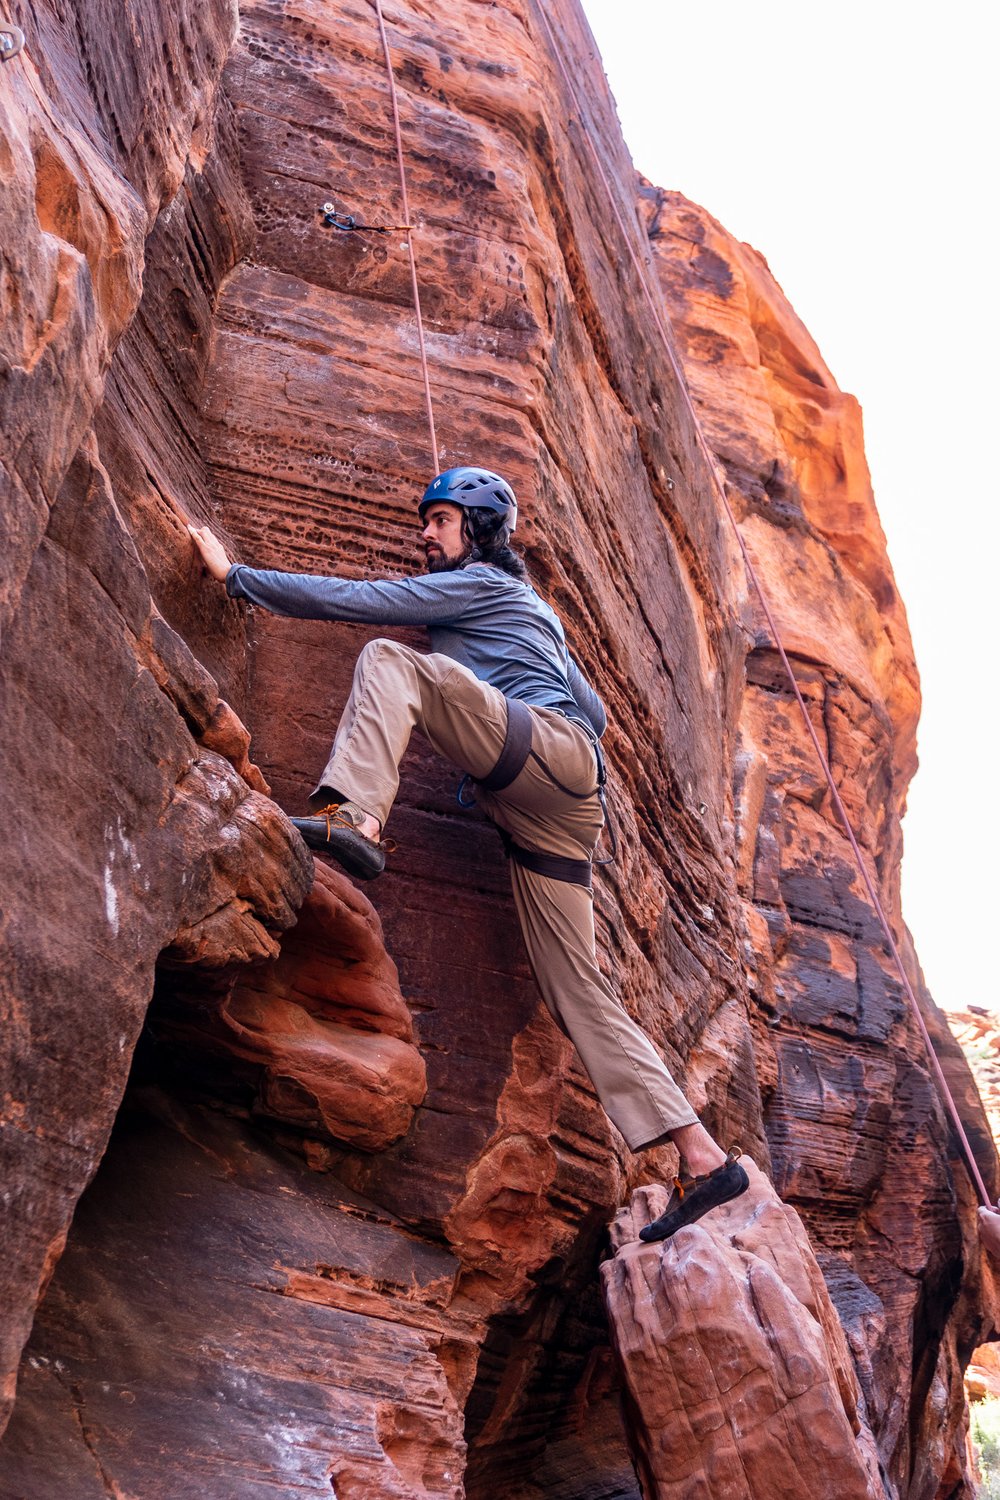 Justin Nelson on Lewd, Crude, and Misconstrued 5.9+